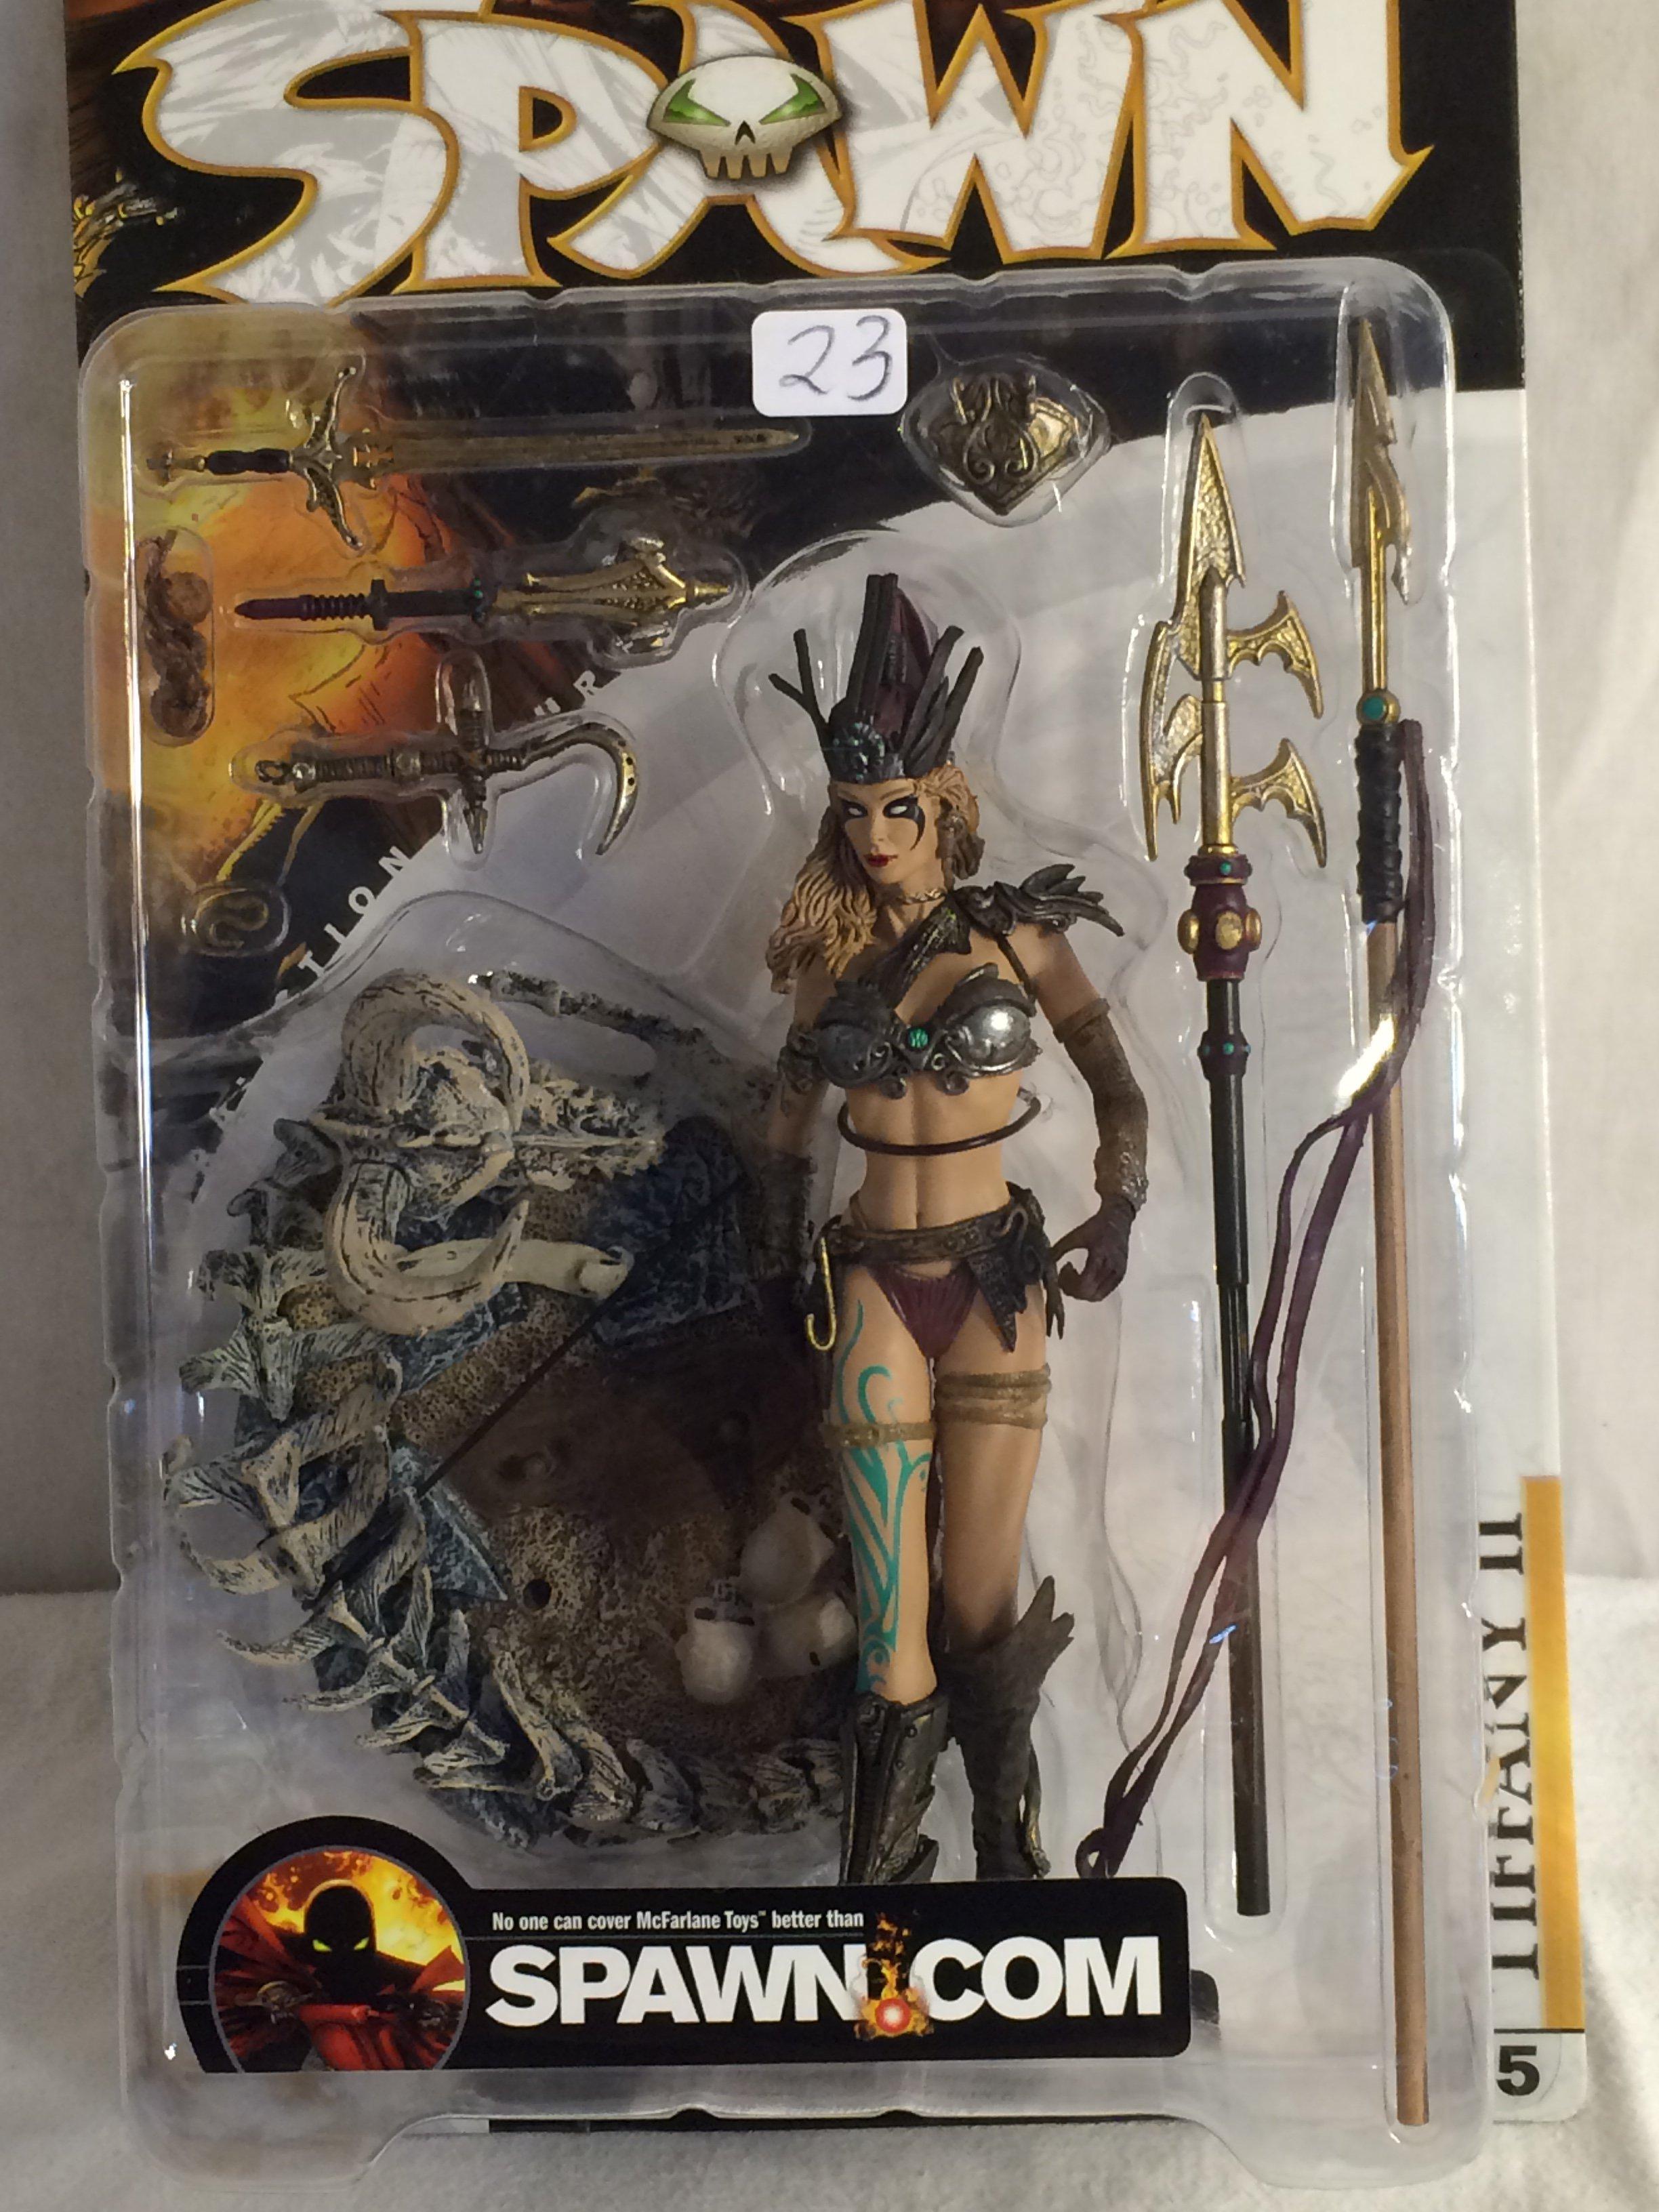 Collector McFarlane's Spawn Classic "Tiffany II" Series 17 Size:7-8"Tall Action Figure